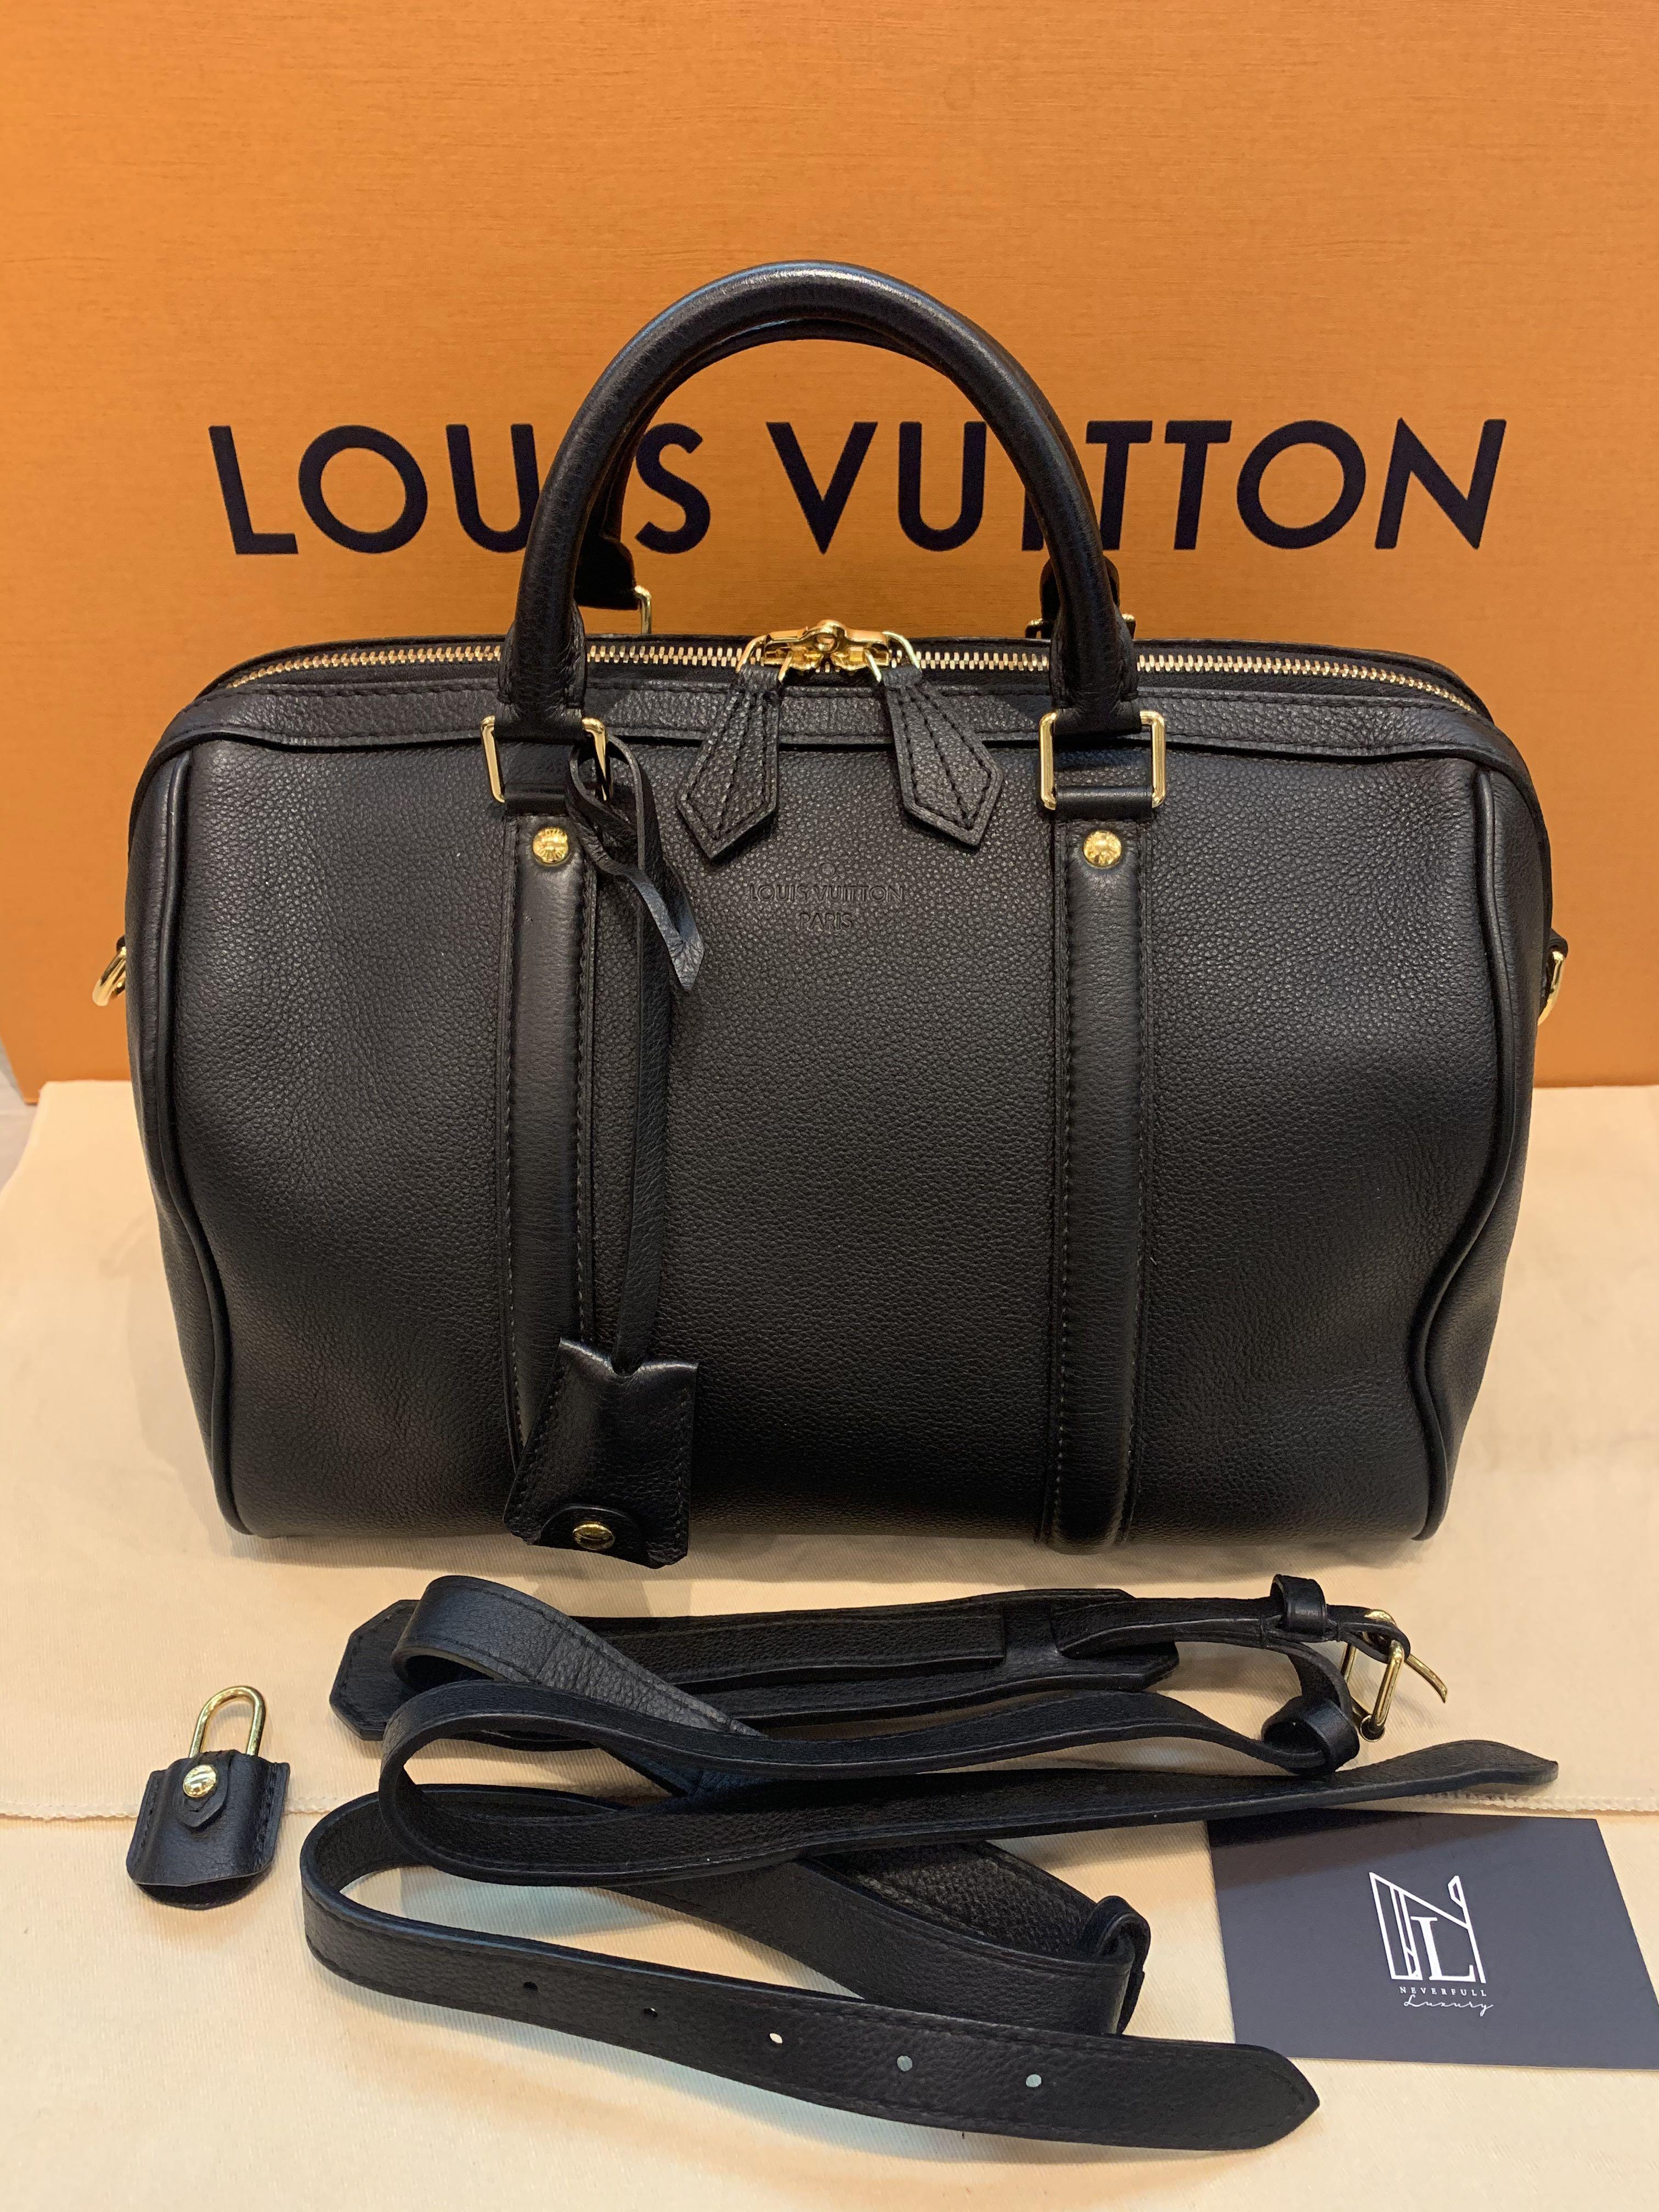 bagfetishperson Kate Moss and Louis Vuitton Sofia Coppola Suede Bag  Kate  moss Louis vuitton prices Suede bags